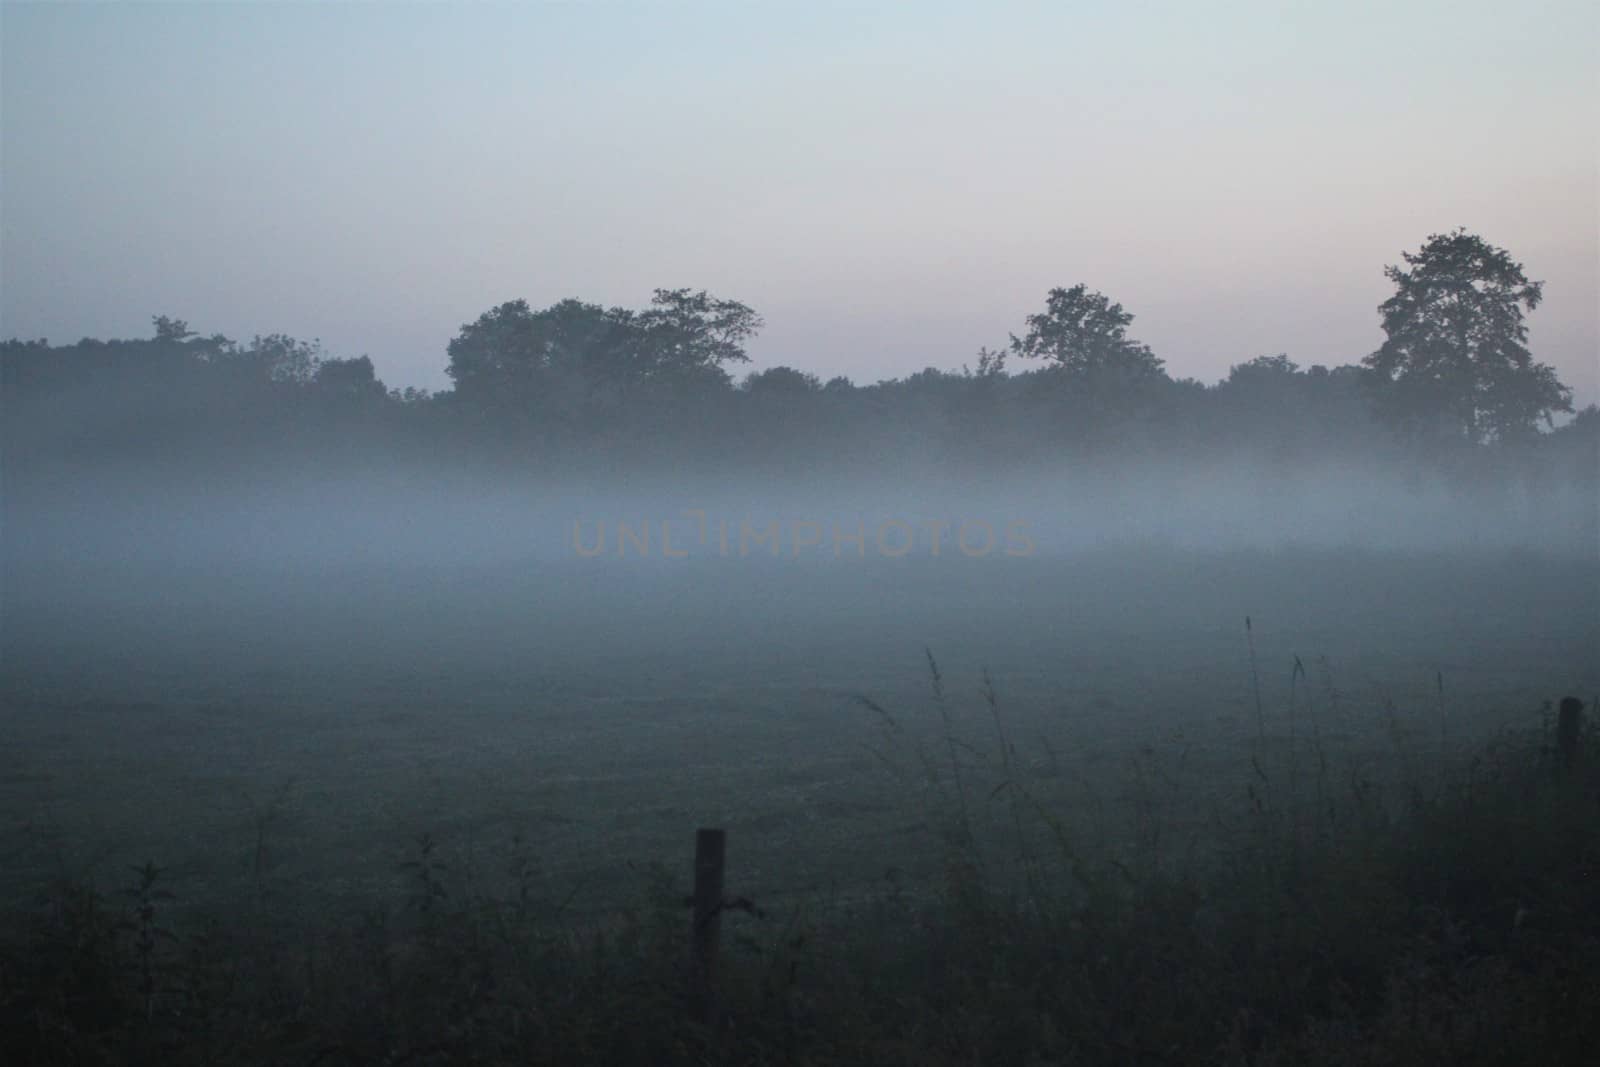 Fog in the evening over a pasture with trees in the background by Luise123